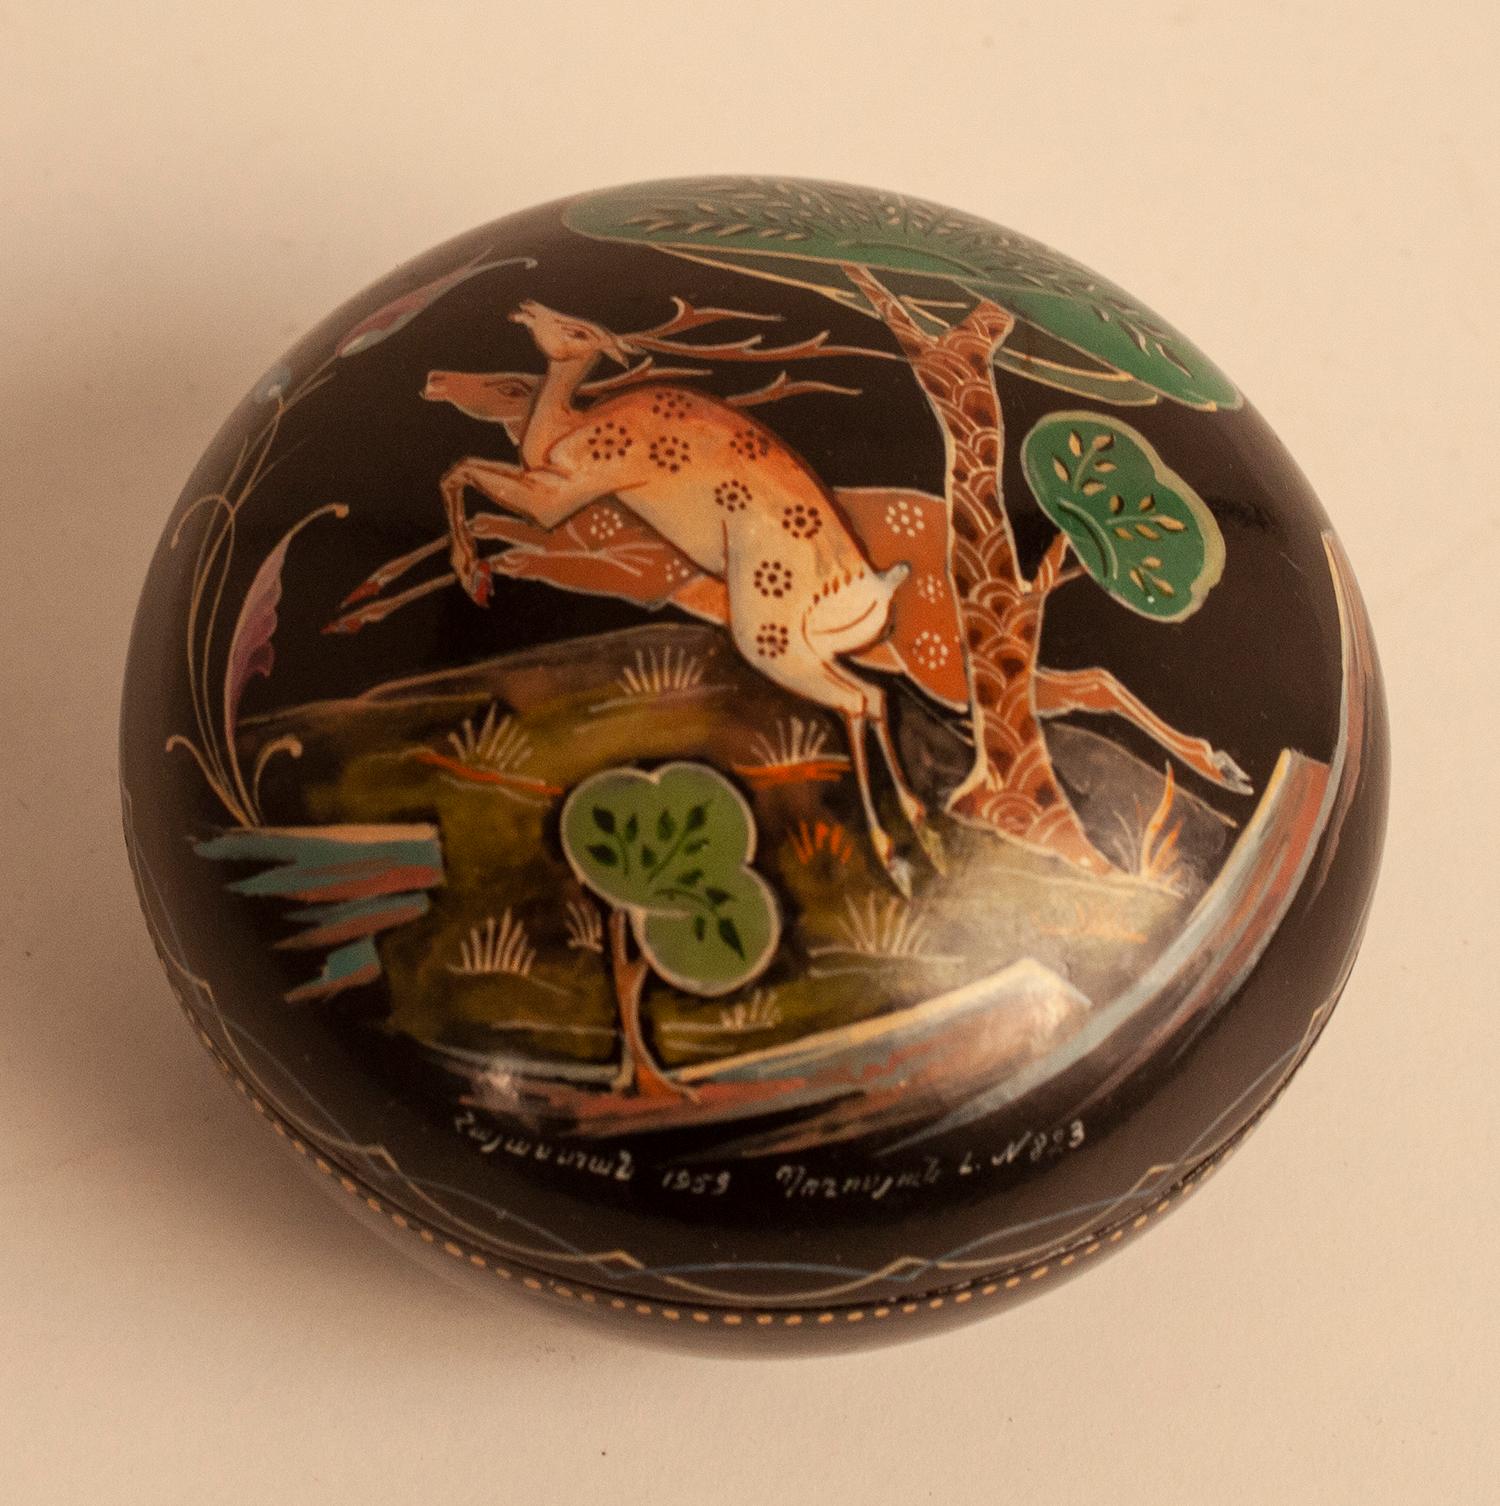 This is a very finely hand painted lidded lacquered box made in Russia, fully signed and dated 1959 which we attribute to the Palekh region workshop.
  